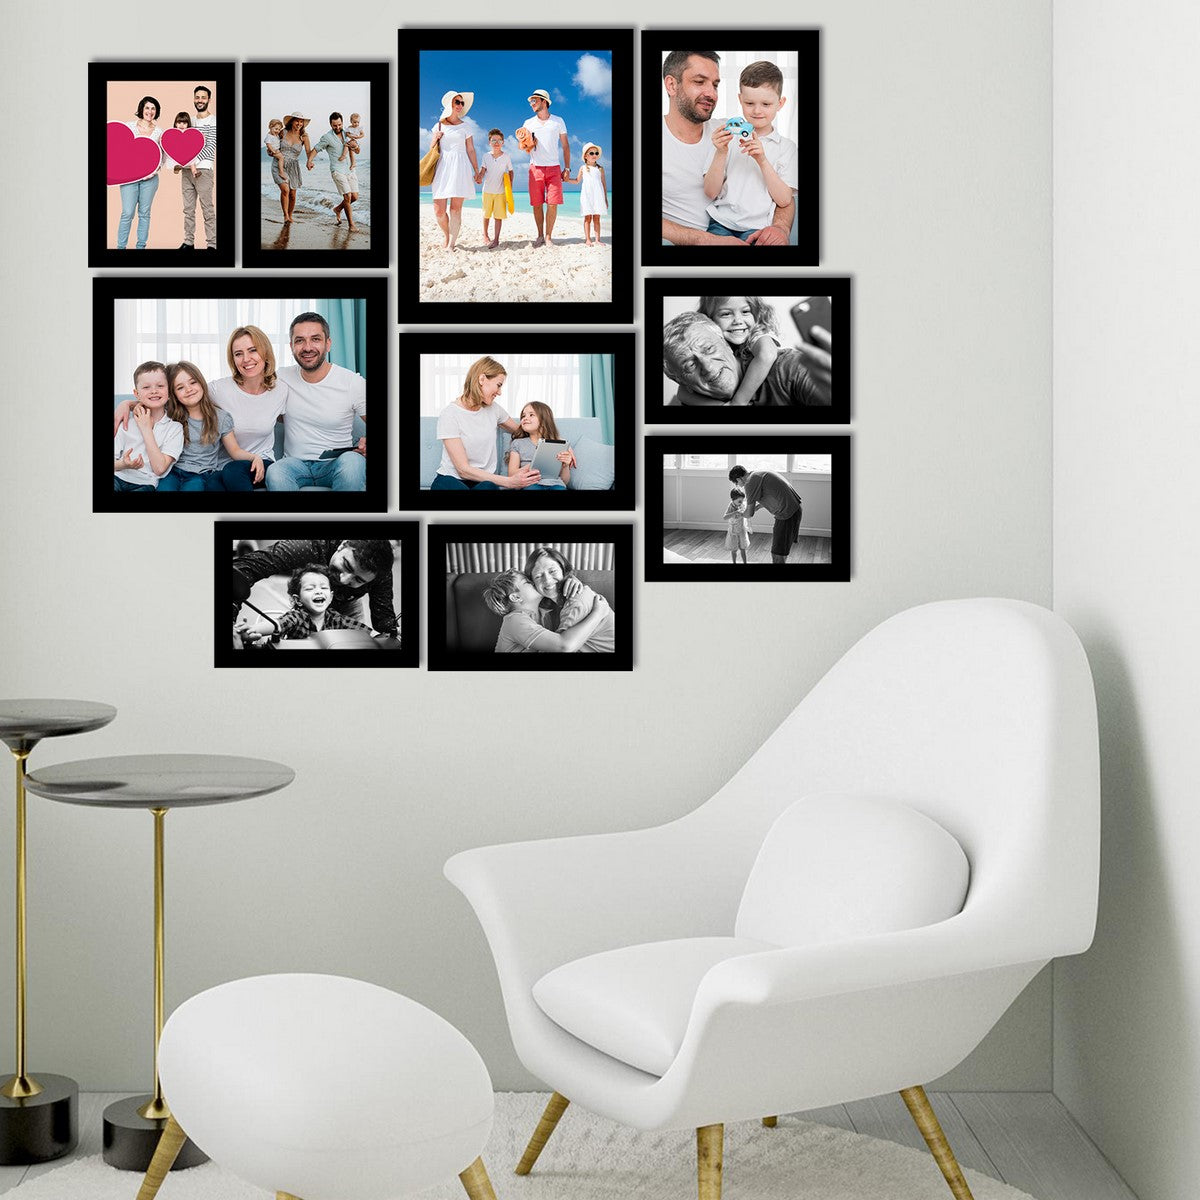 Memory Wall Collage Photo Frame - Set of 10 Photo Frames for 6 Photos of 5"x7", 2 Photos of 6"x8" and 2 Photos of 8"x10" 2